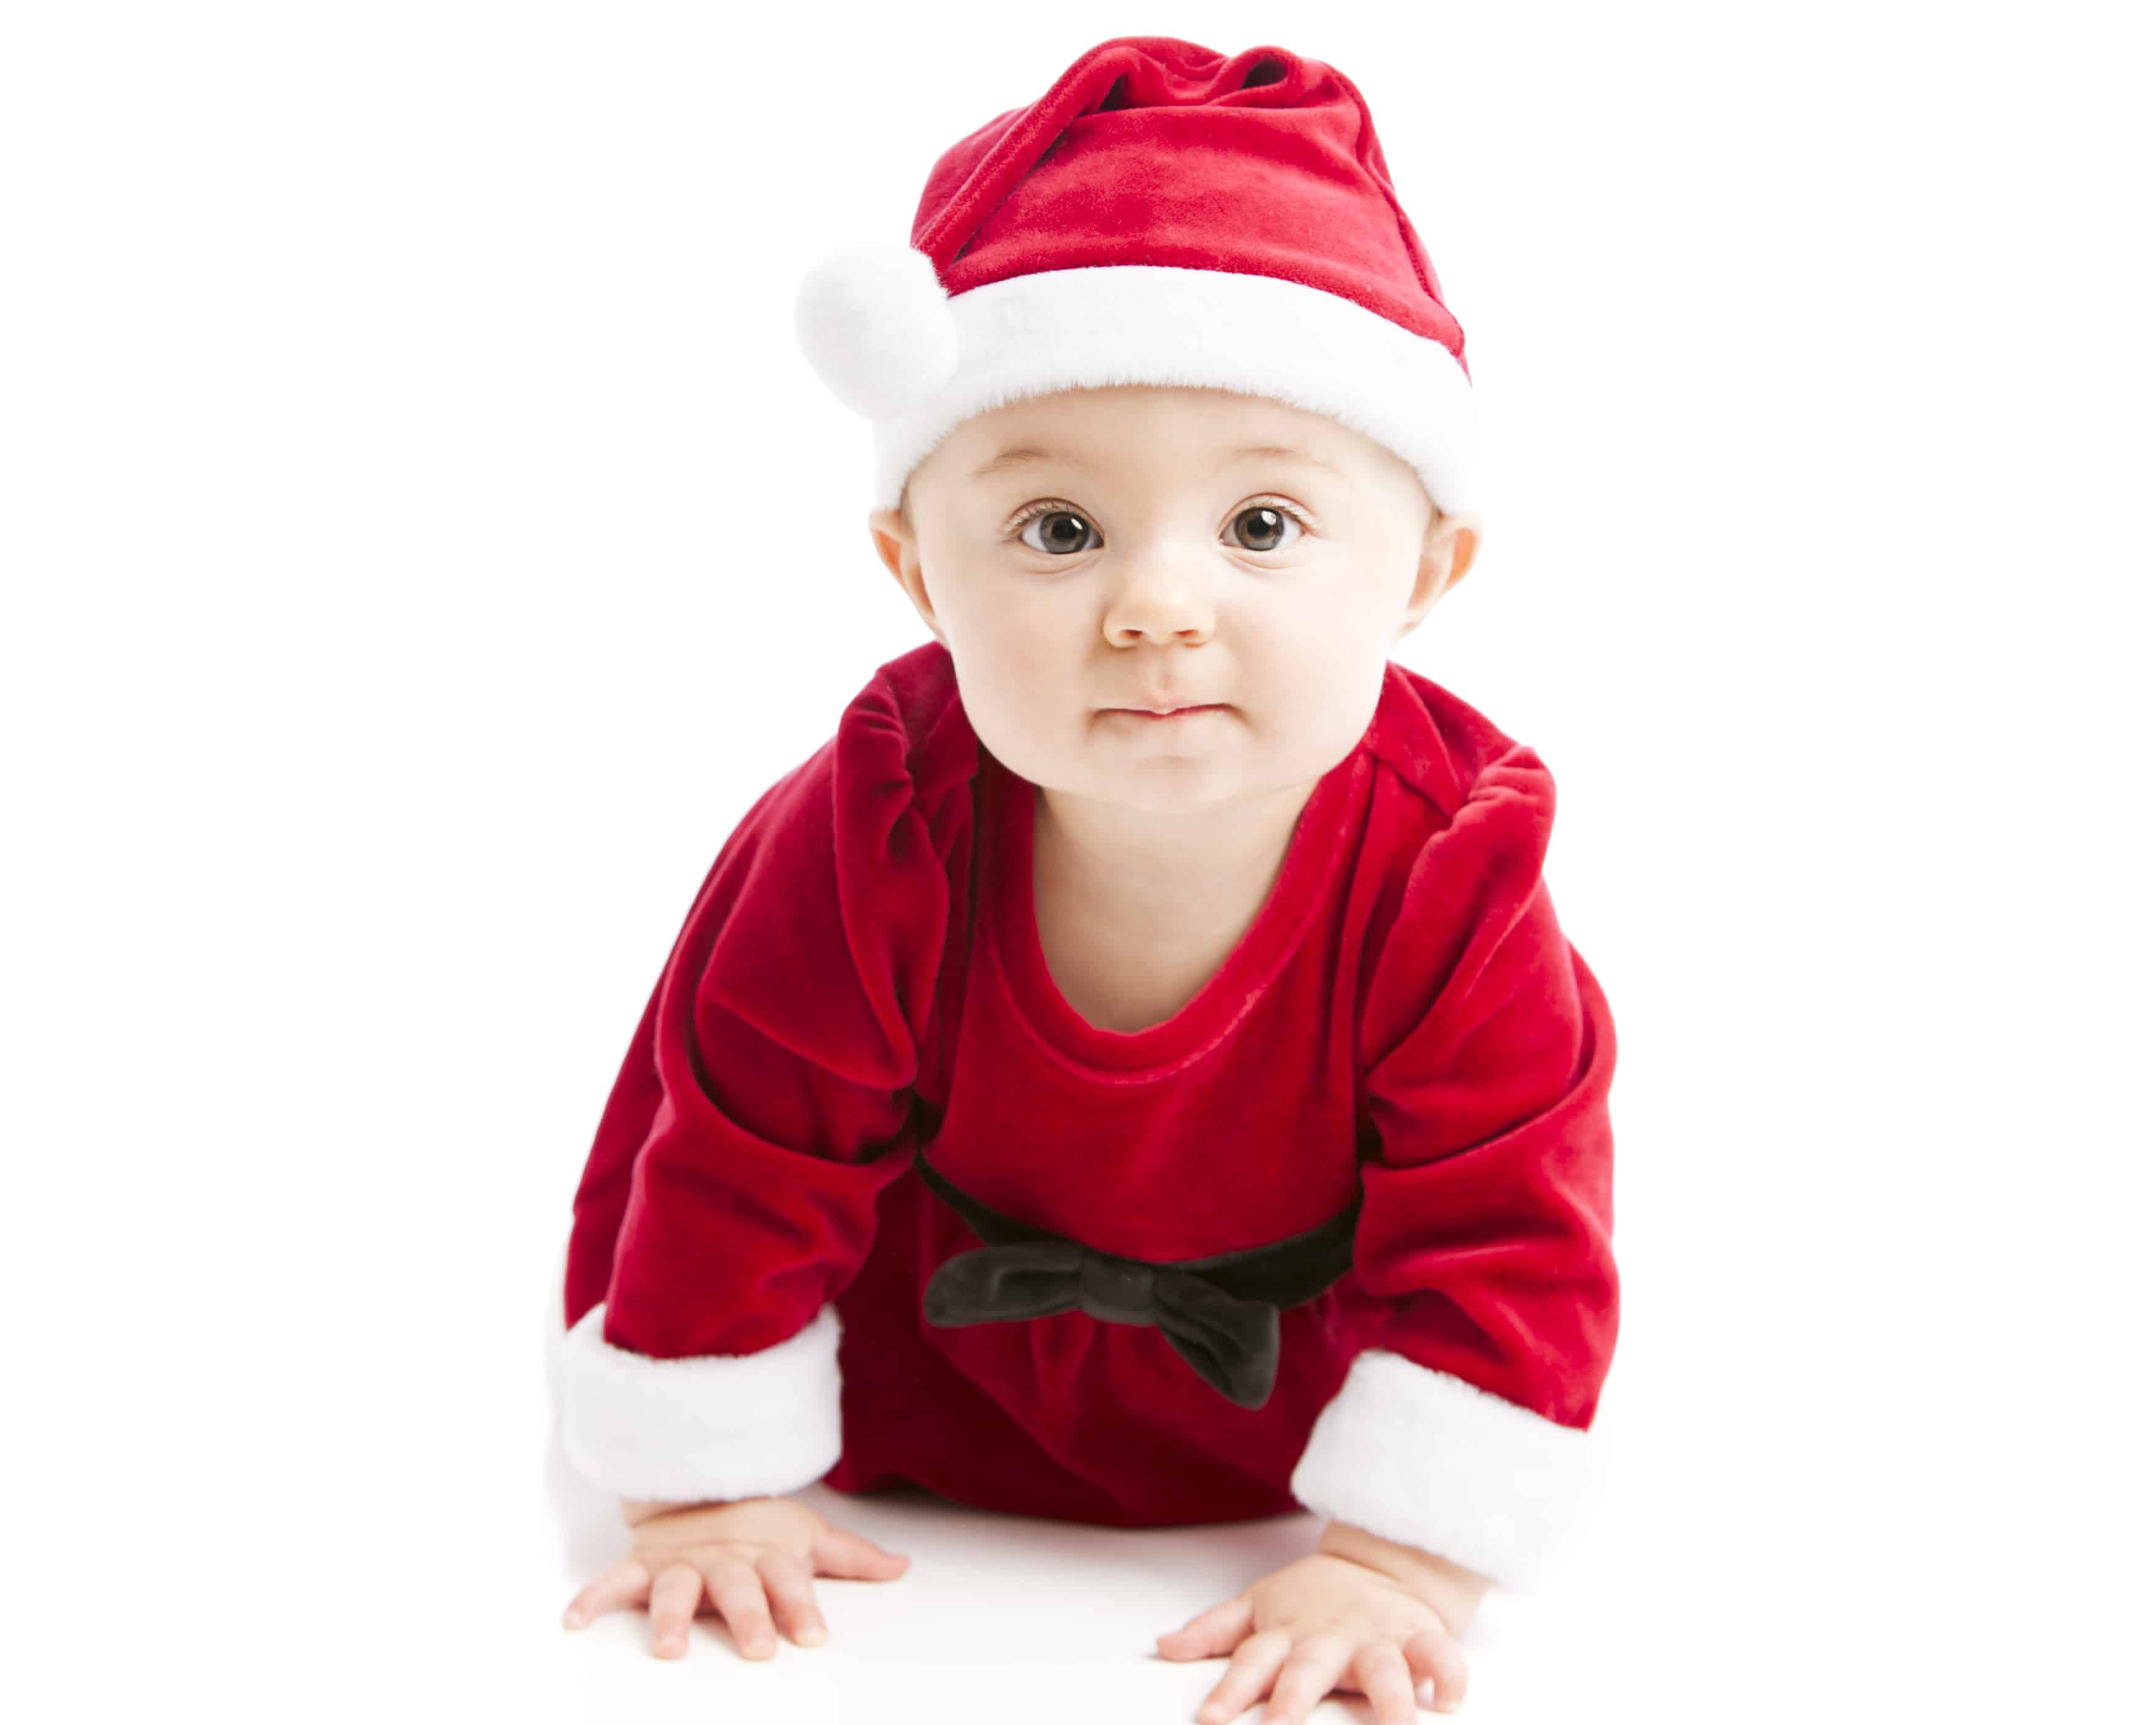 The holidays are a great time to teach your baby some fun new baby sign language! Learn how to sign CHRISTMAS, TREE, SANTA, LIGHT, REINDEER, ELF, GIFT, BELL and STAR in this free video tutorial.